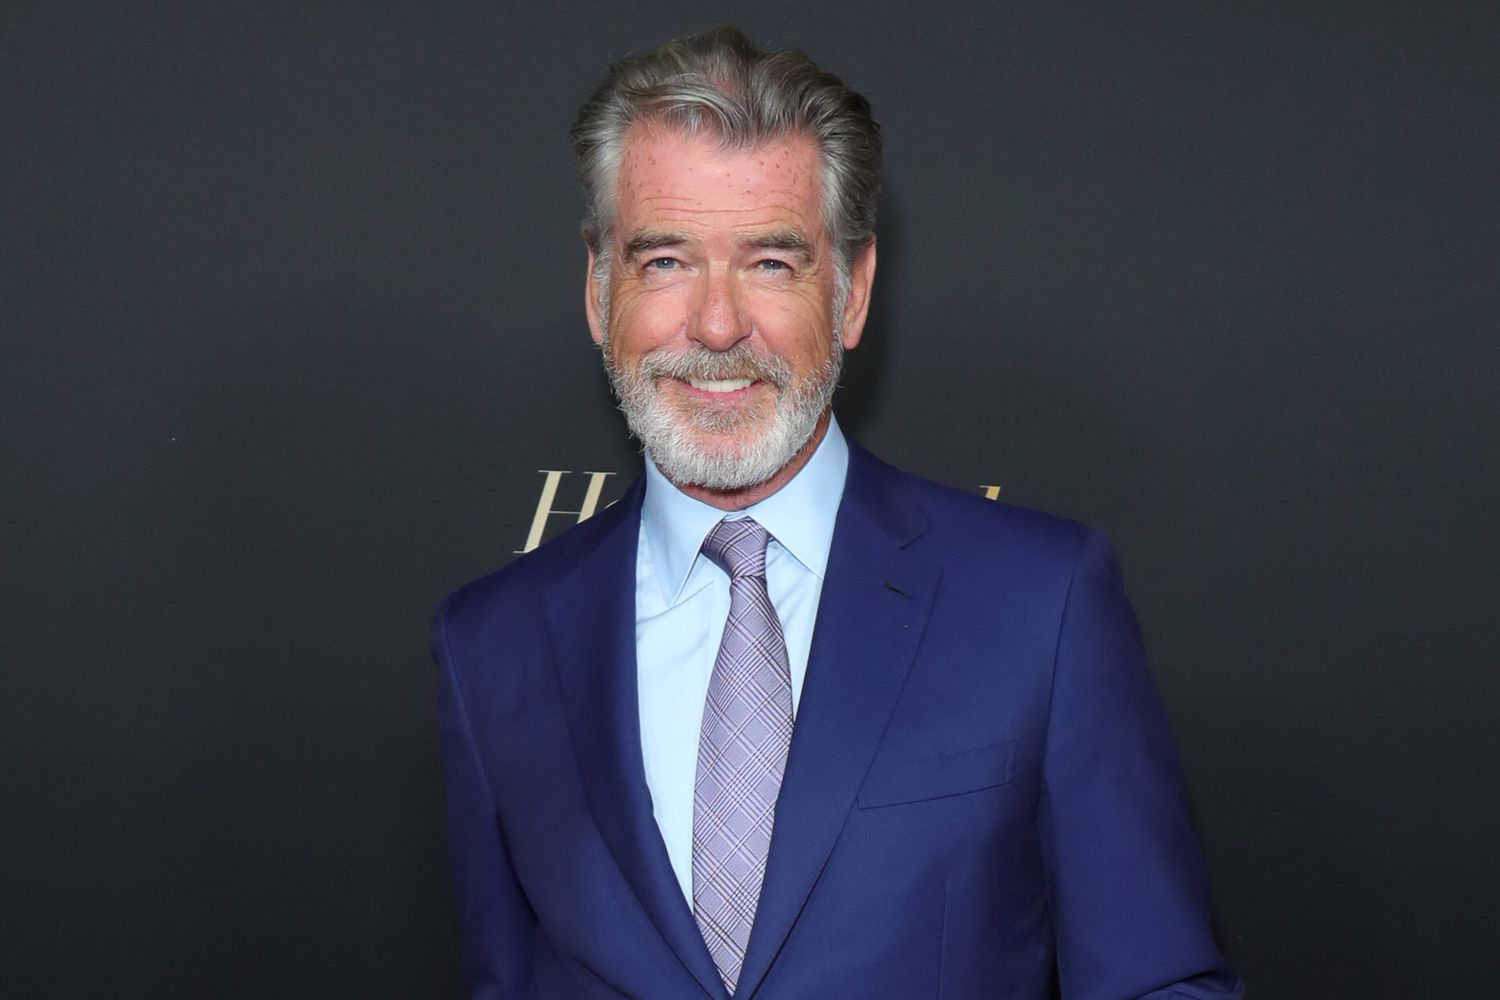 Pierce Brosnan attends HFPA And THR Golden Globe Ambassador Party at Catch LA on November 14, 2019 in West Hollywood, California.